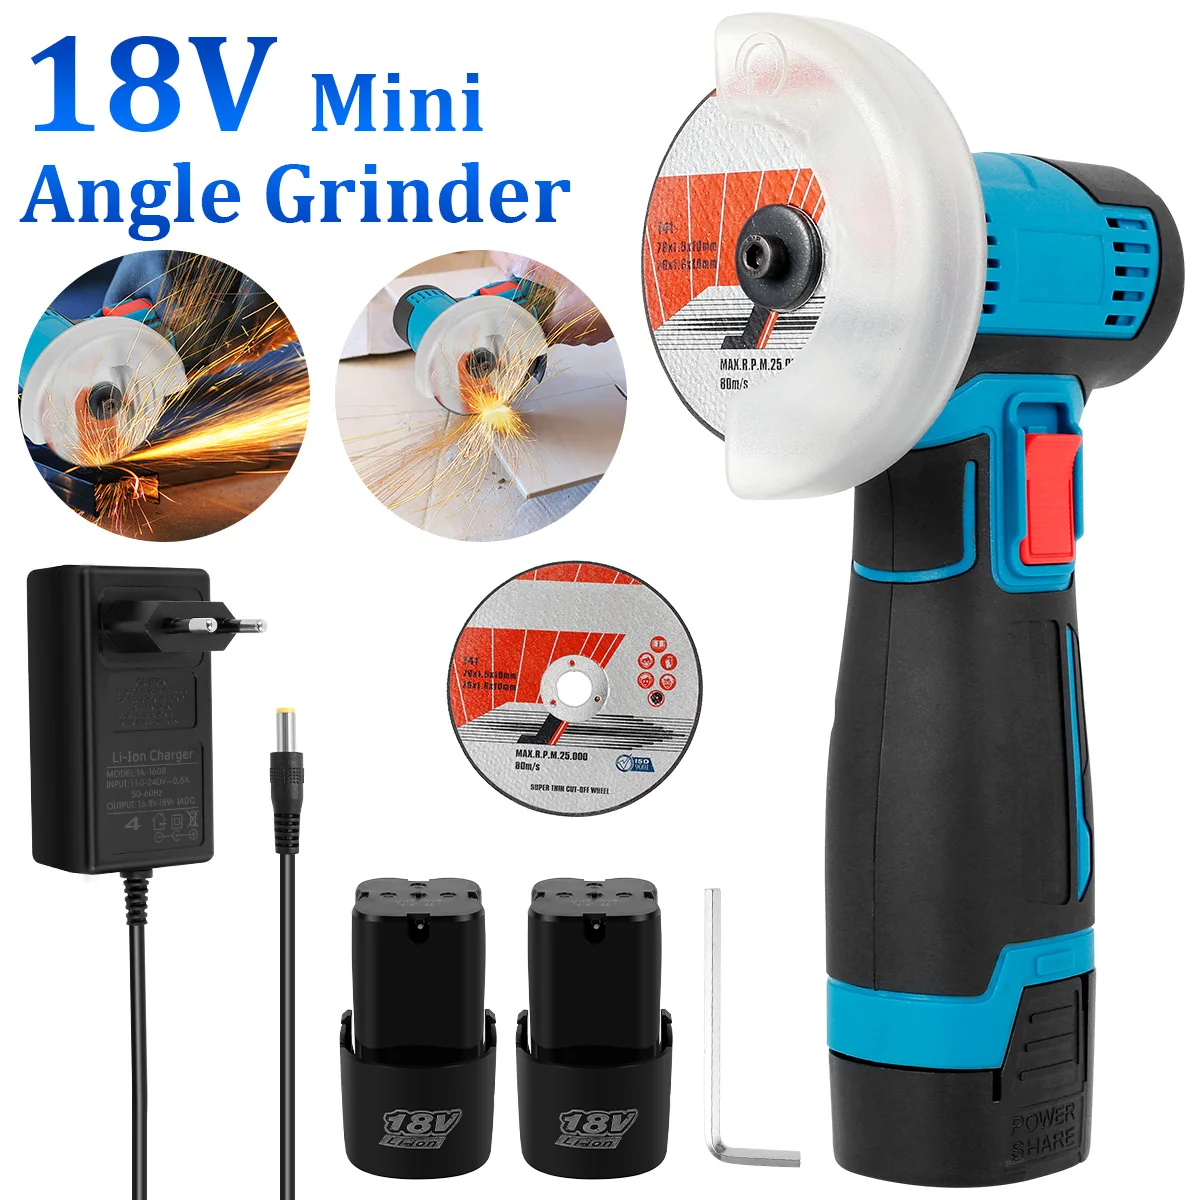 NewMini Angle Grinder 18V 9000rpm Professional Small Angle Grinder Tool with 1/2 Battery and 2 Discs Electric Grinder Machine